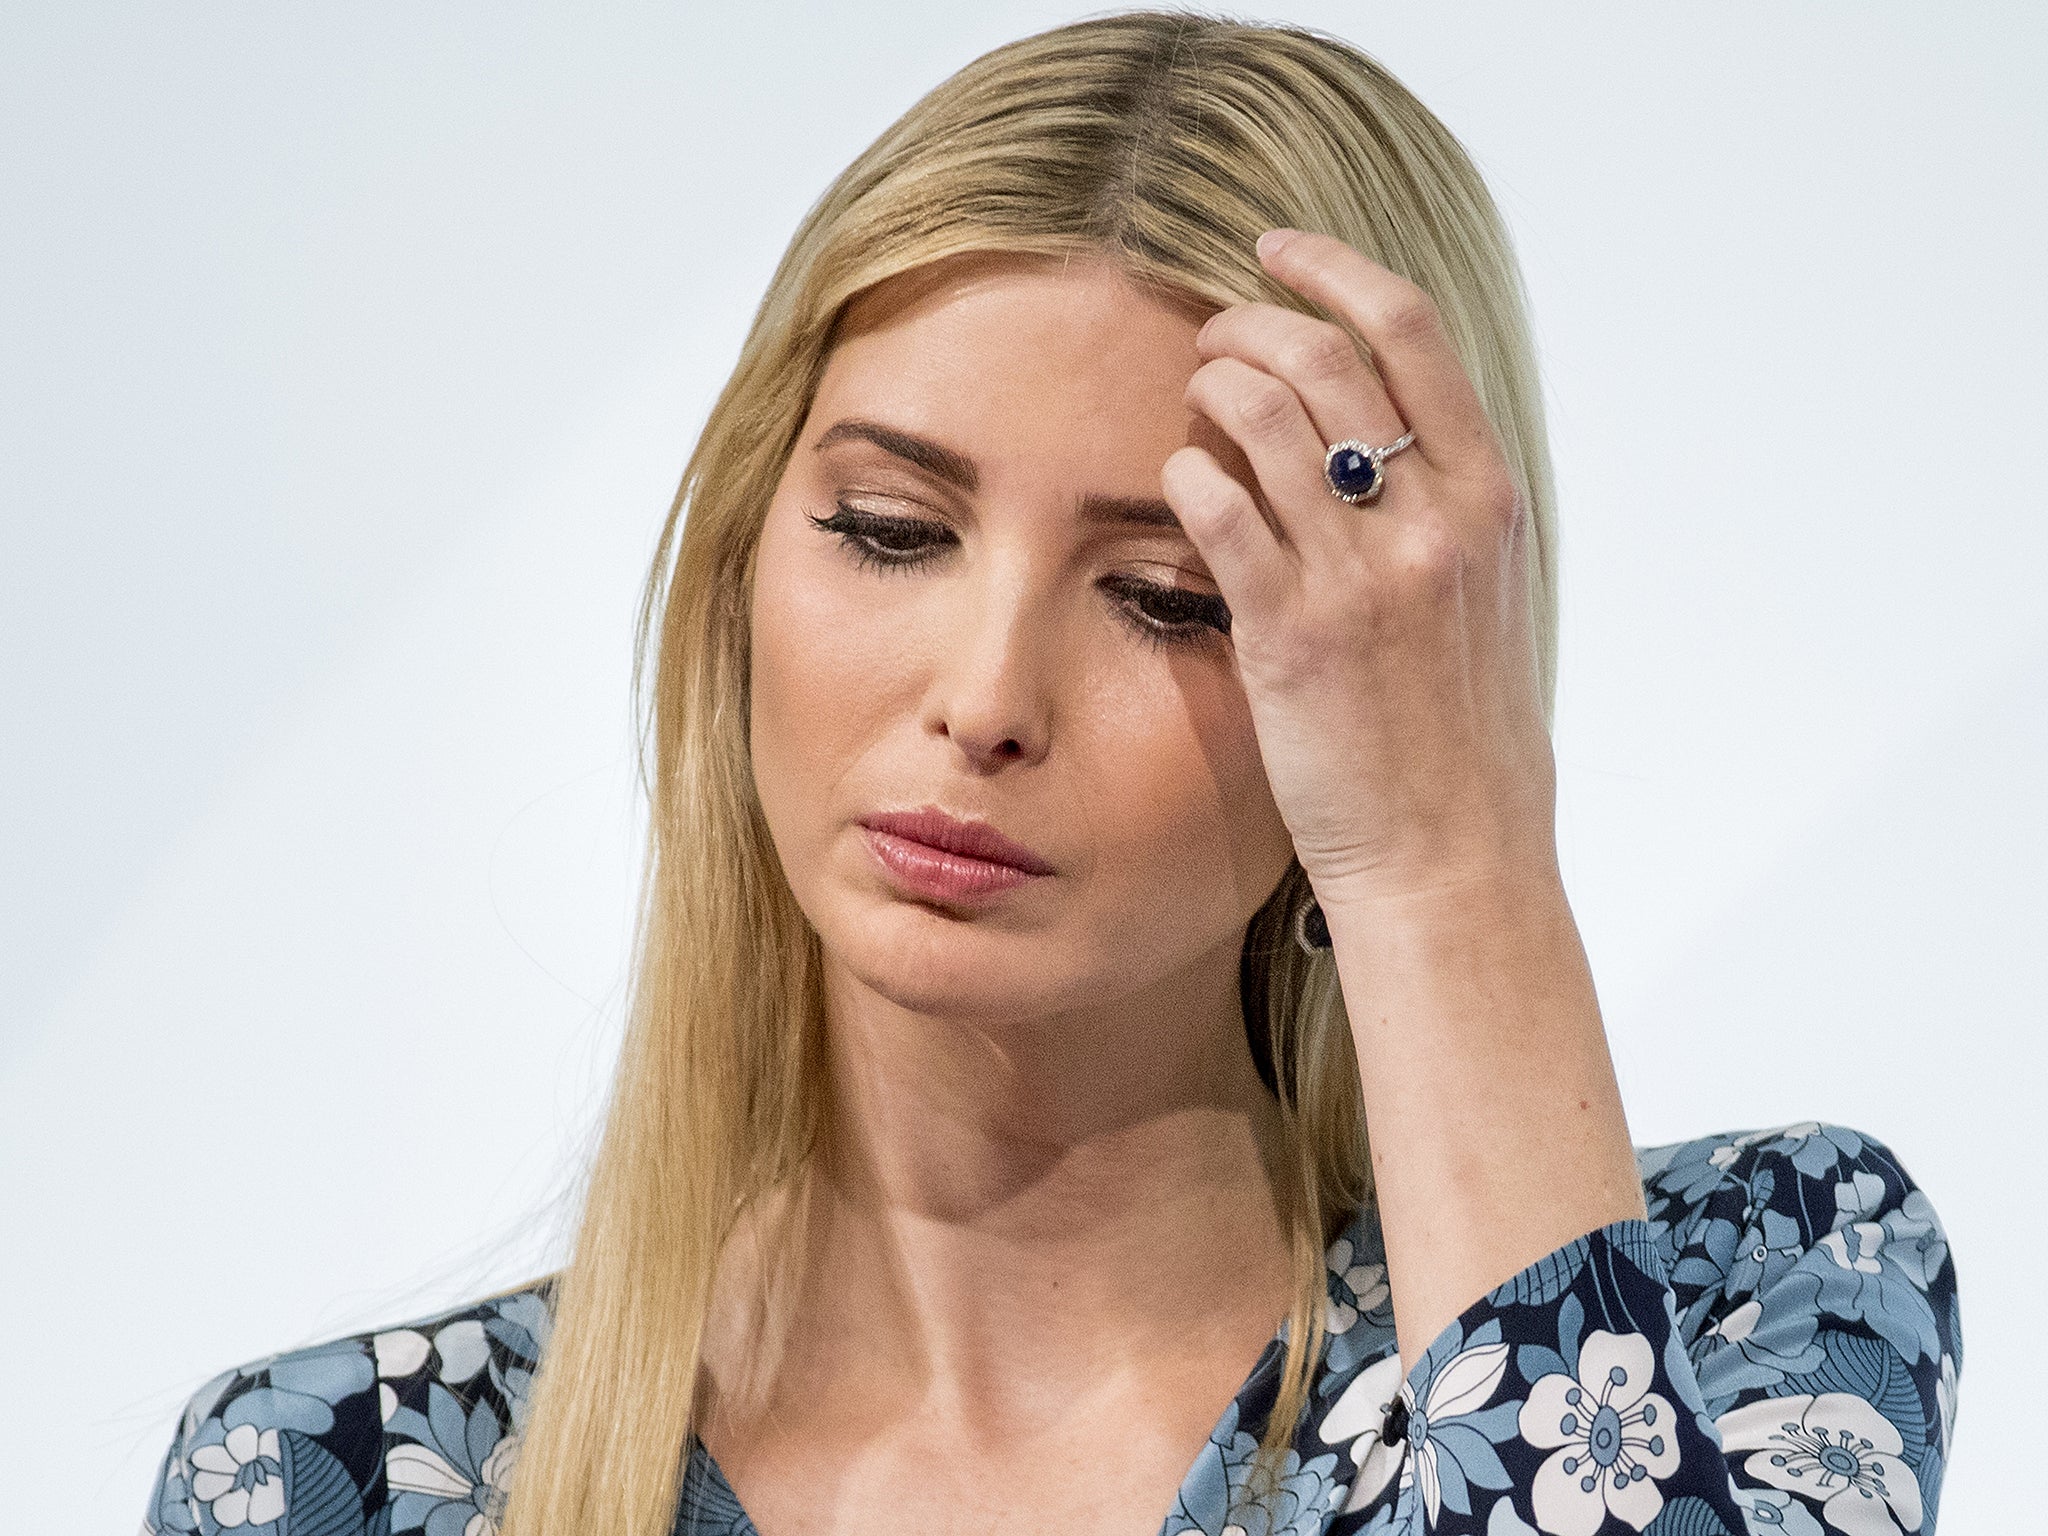 Related video: Ivanka Trump 'greeted with half empty-room' while giving Tokyo speech on women's empowerment